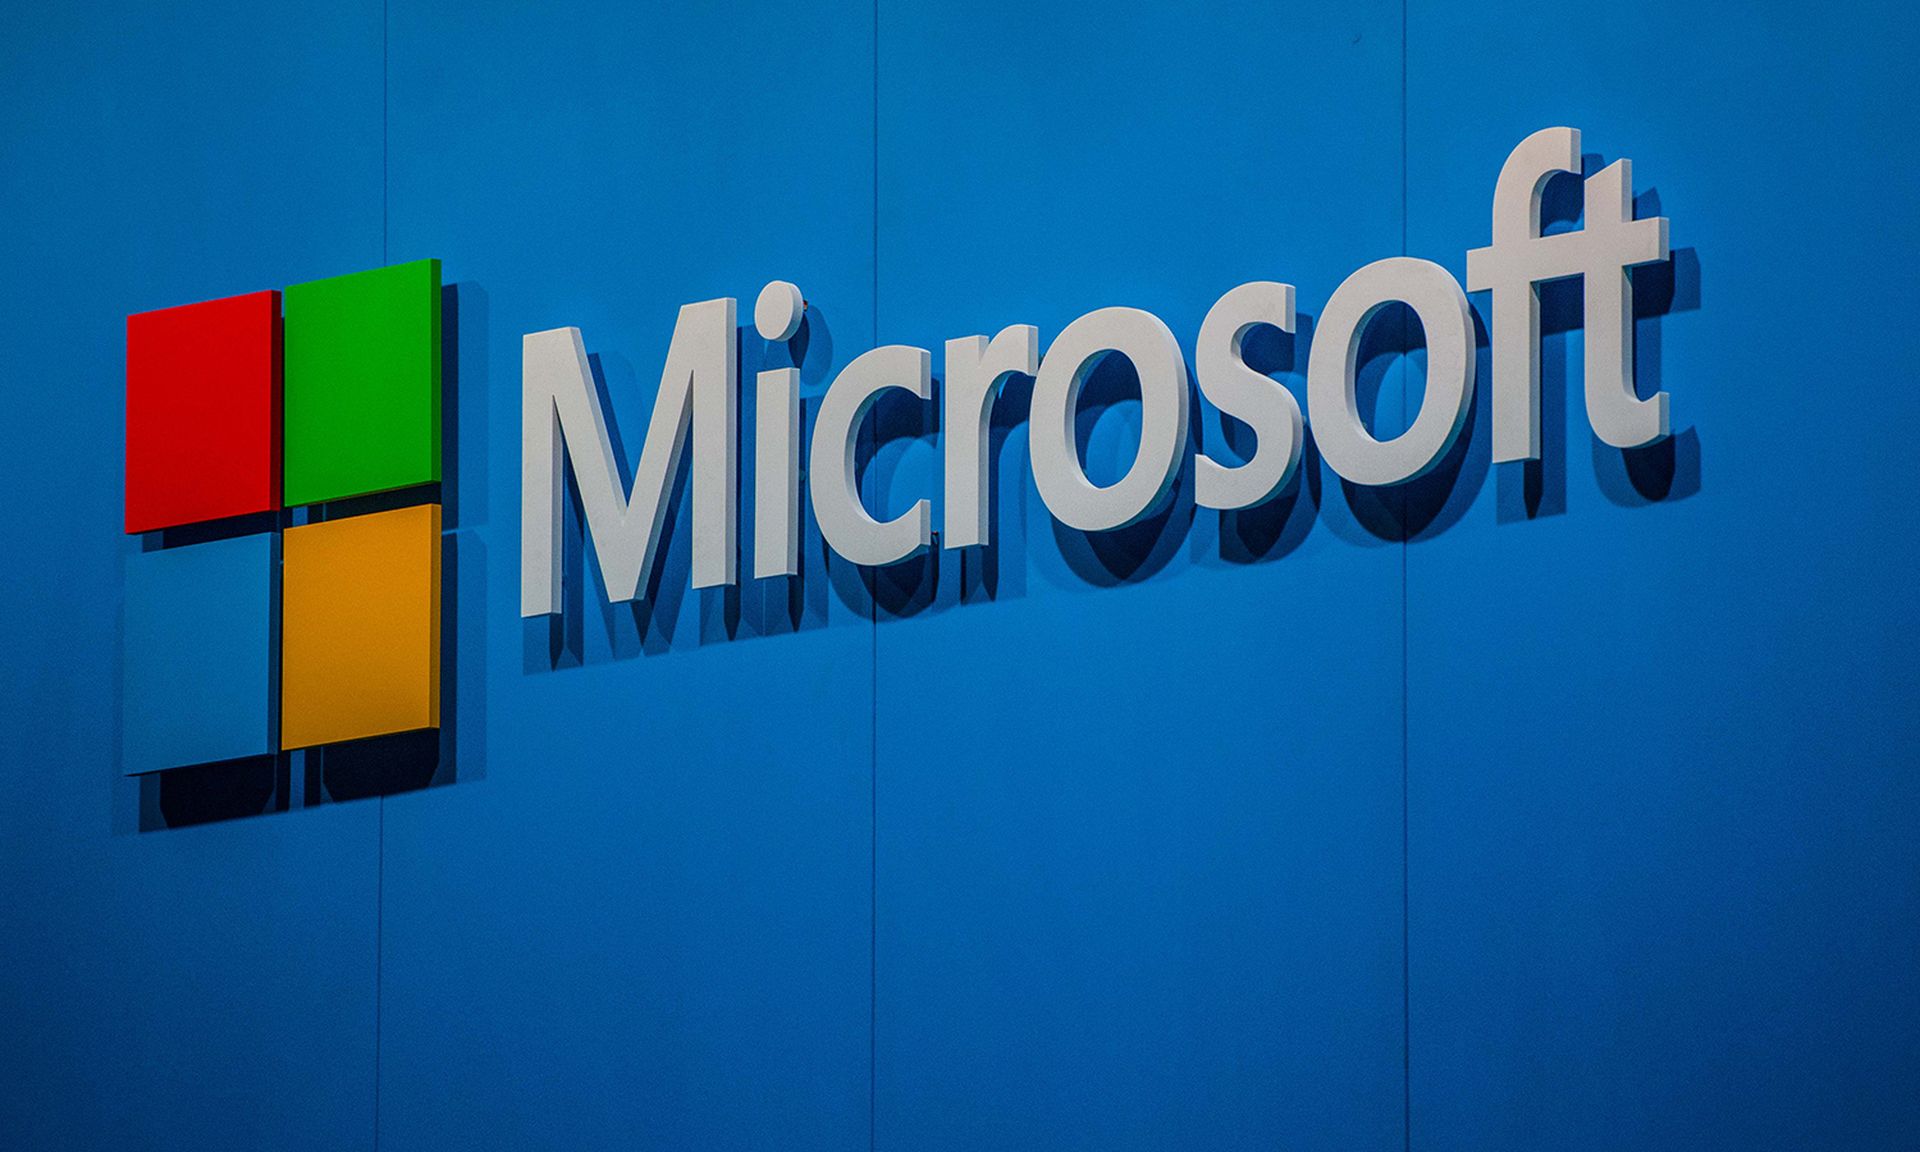 Microsoft has patched a FabricScape vulnerability affecting Linux containers, Palo Alto Unit 42 researchers reported. Pictured: A Microsoft logo is displayed at the Mobile World Congress 2015 at the Fira Gran Via complex on March 3, 2015, in Barcelona. (Photo by David Ramos/Getty Images)